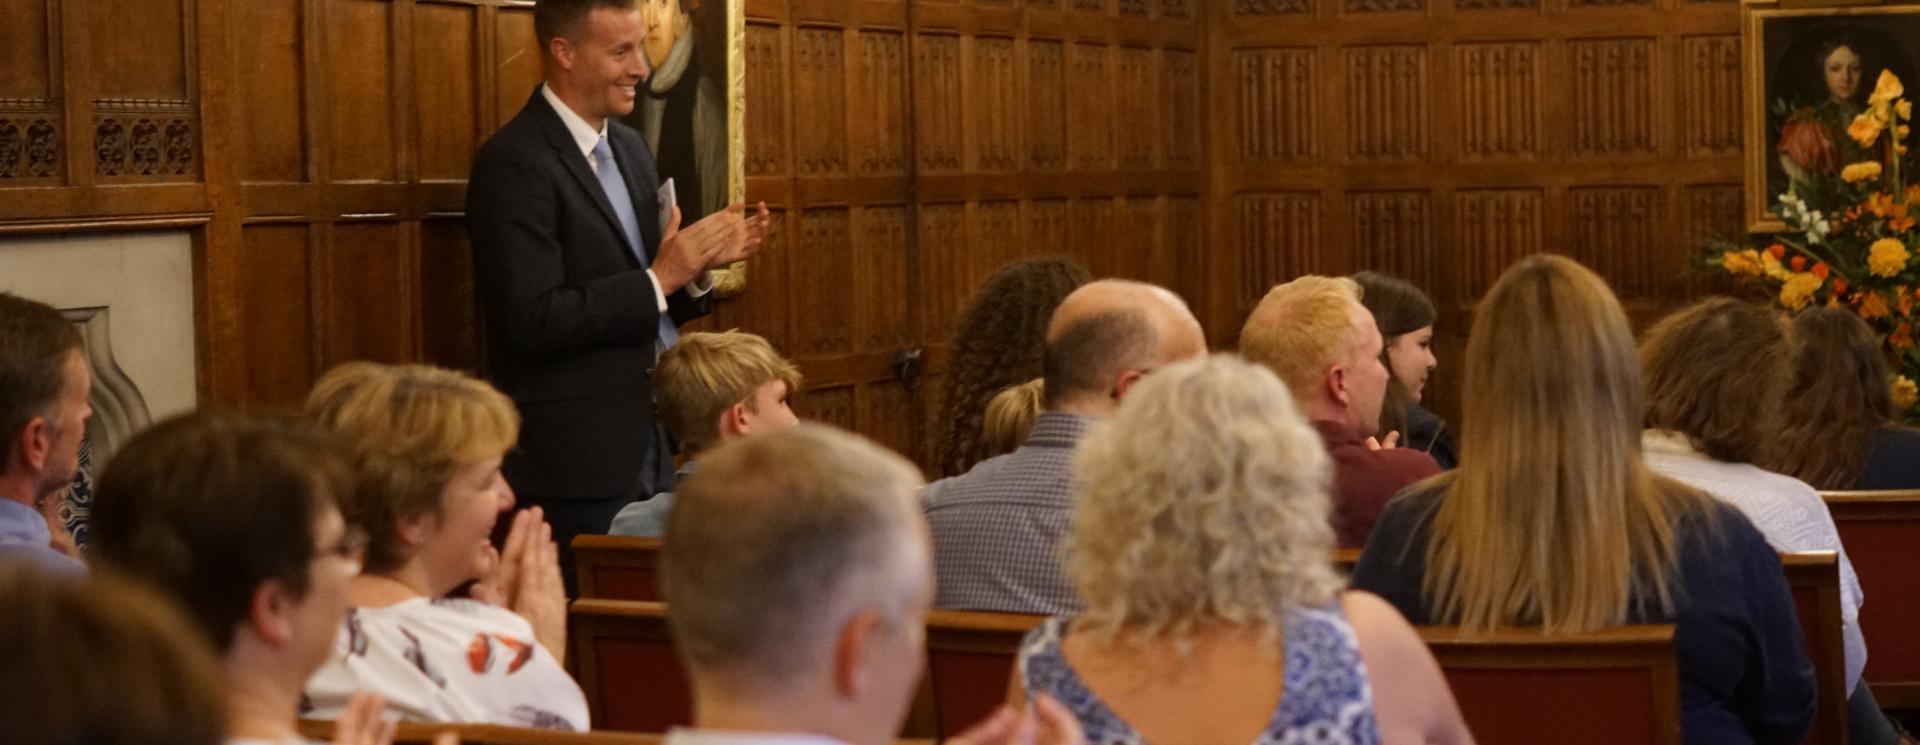 Parents and guardians attending an event at St Catharine's with their children. A male teacher is stood at the side of the seated audience, joining them in applause.